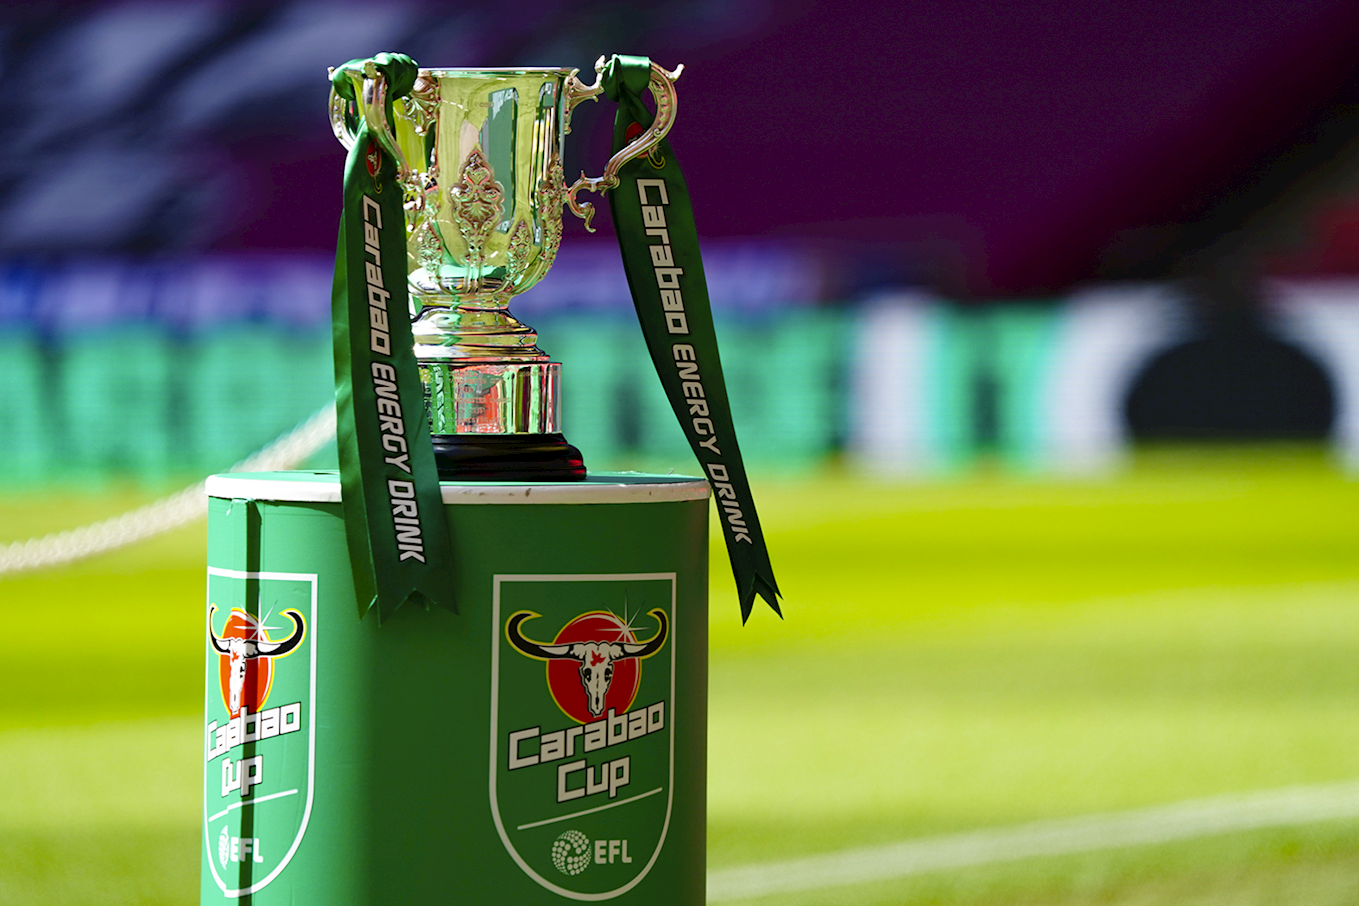 Carabao Cup 2021/22: Time, TV Fixtures, How to Watch, Live Stream, Teams and Odds